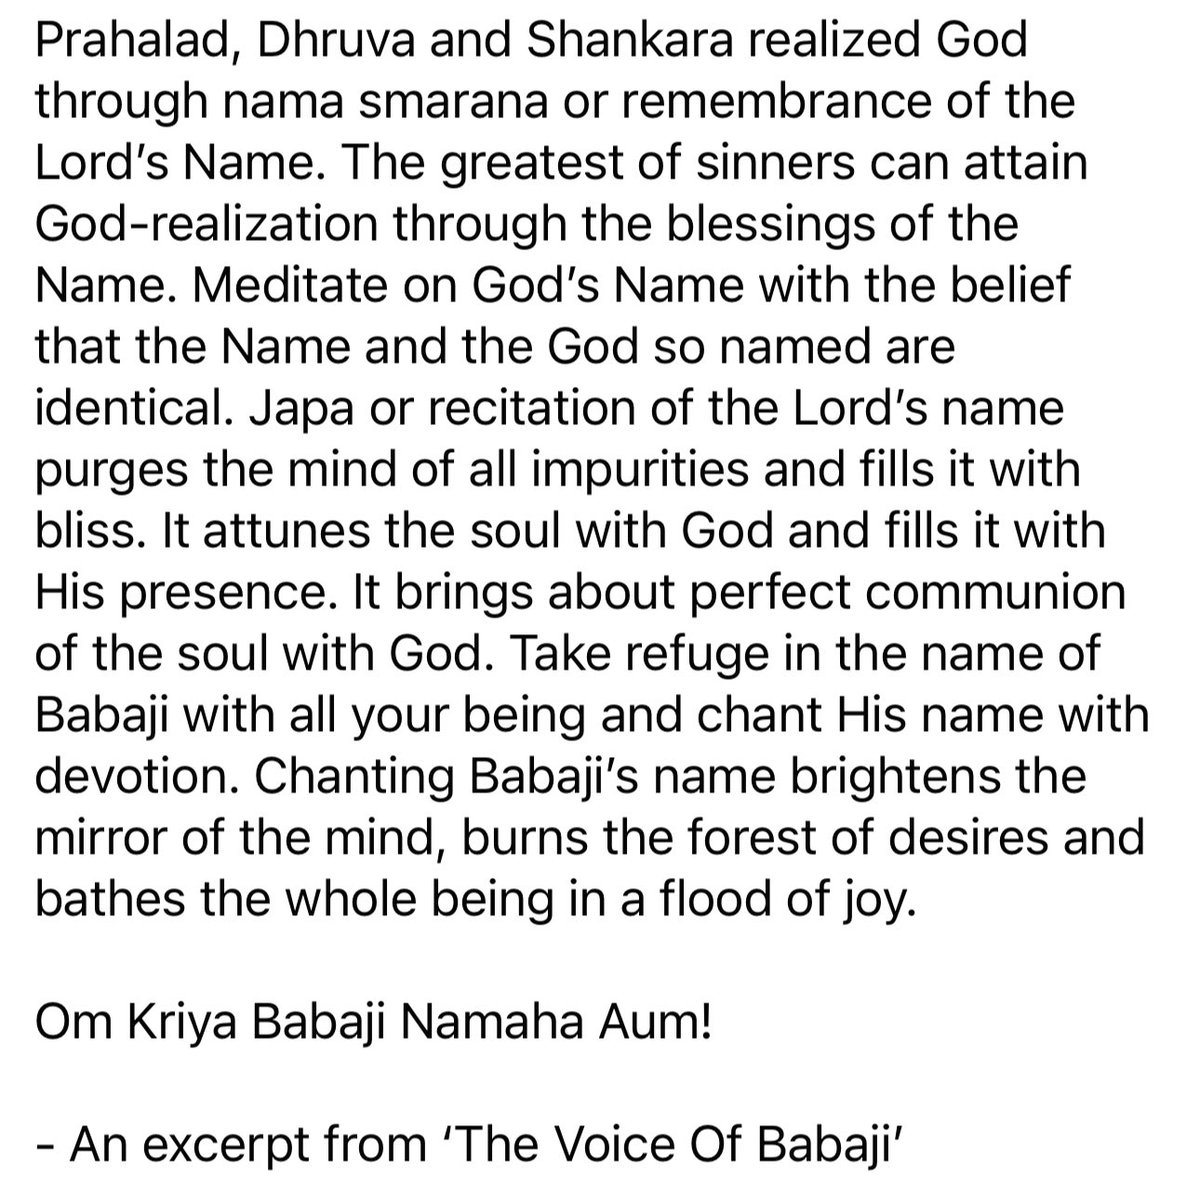 Take refuge in the name of Babaji with all your being and chant His name with devotion. Chanting Babaji’s name brightens the mirror of the mind, burns the forest of desires and bathes the whole being in a flood of joy. Om Kriya Babaji Namaha Aum!